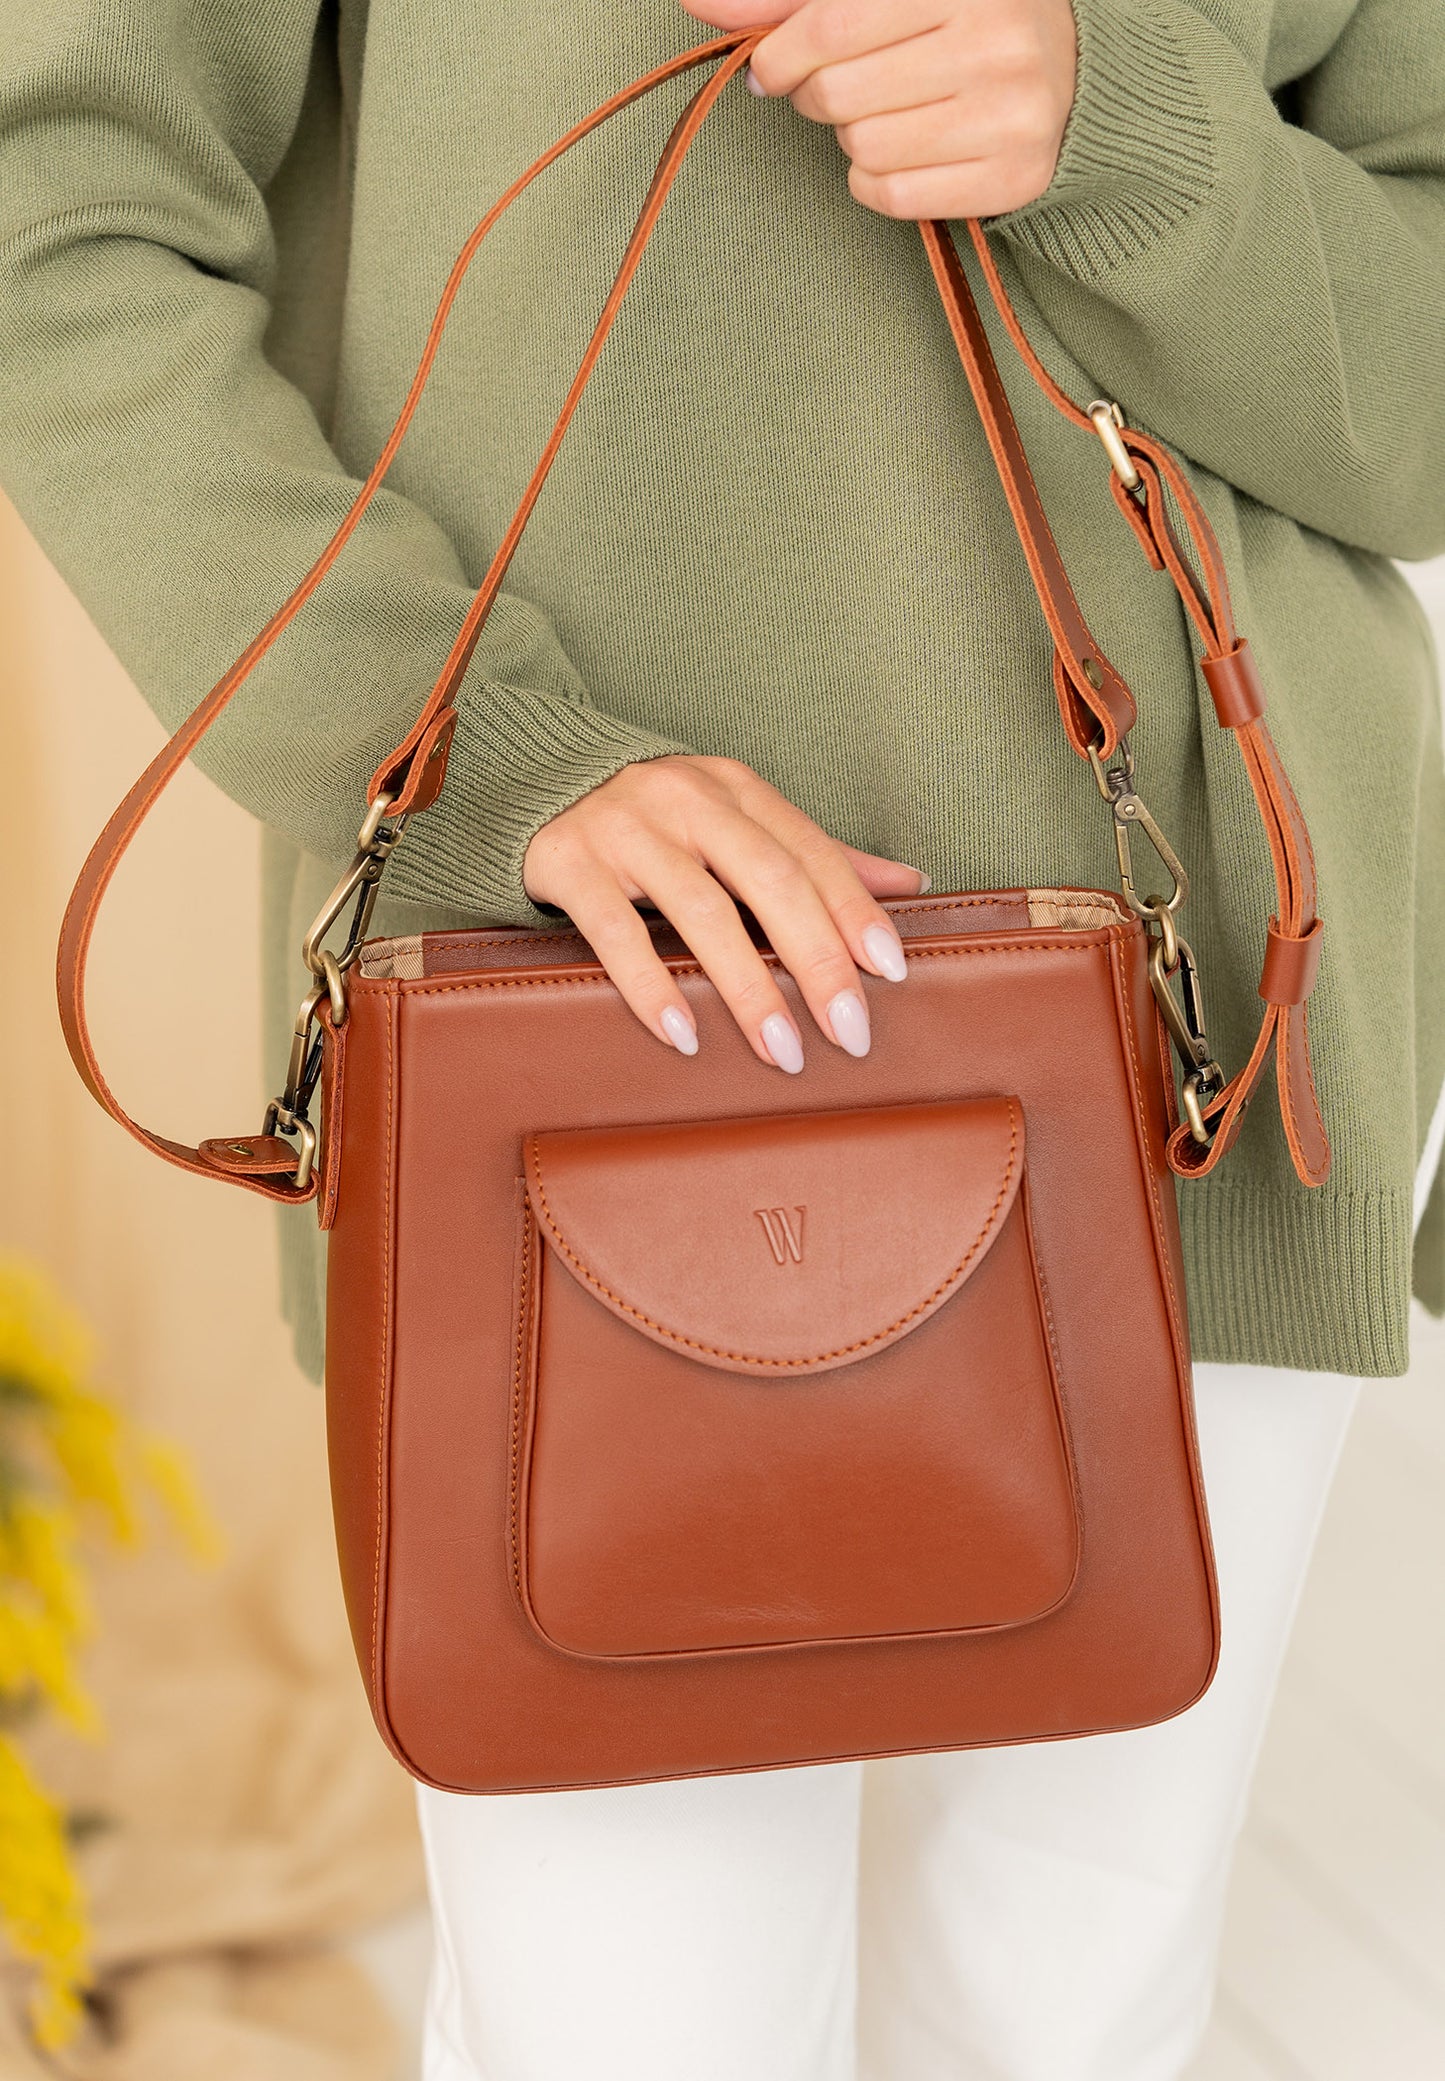 Medium leather bag for women in umber color